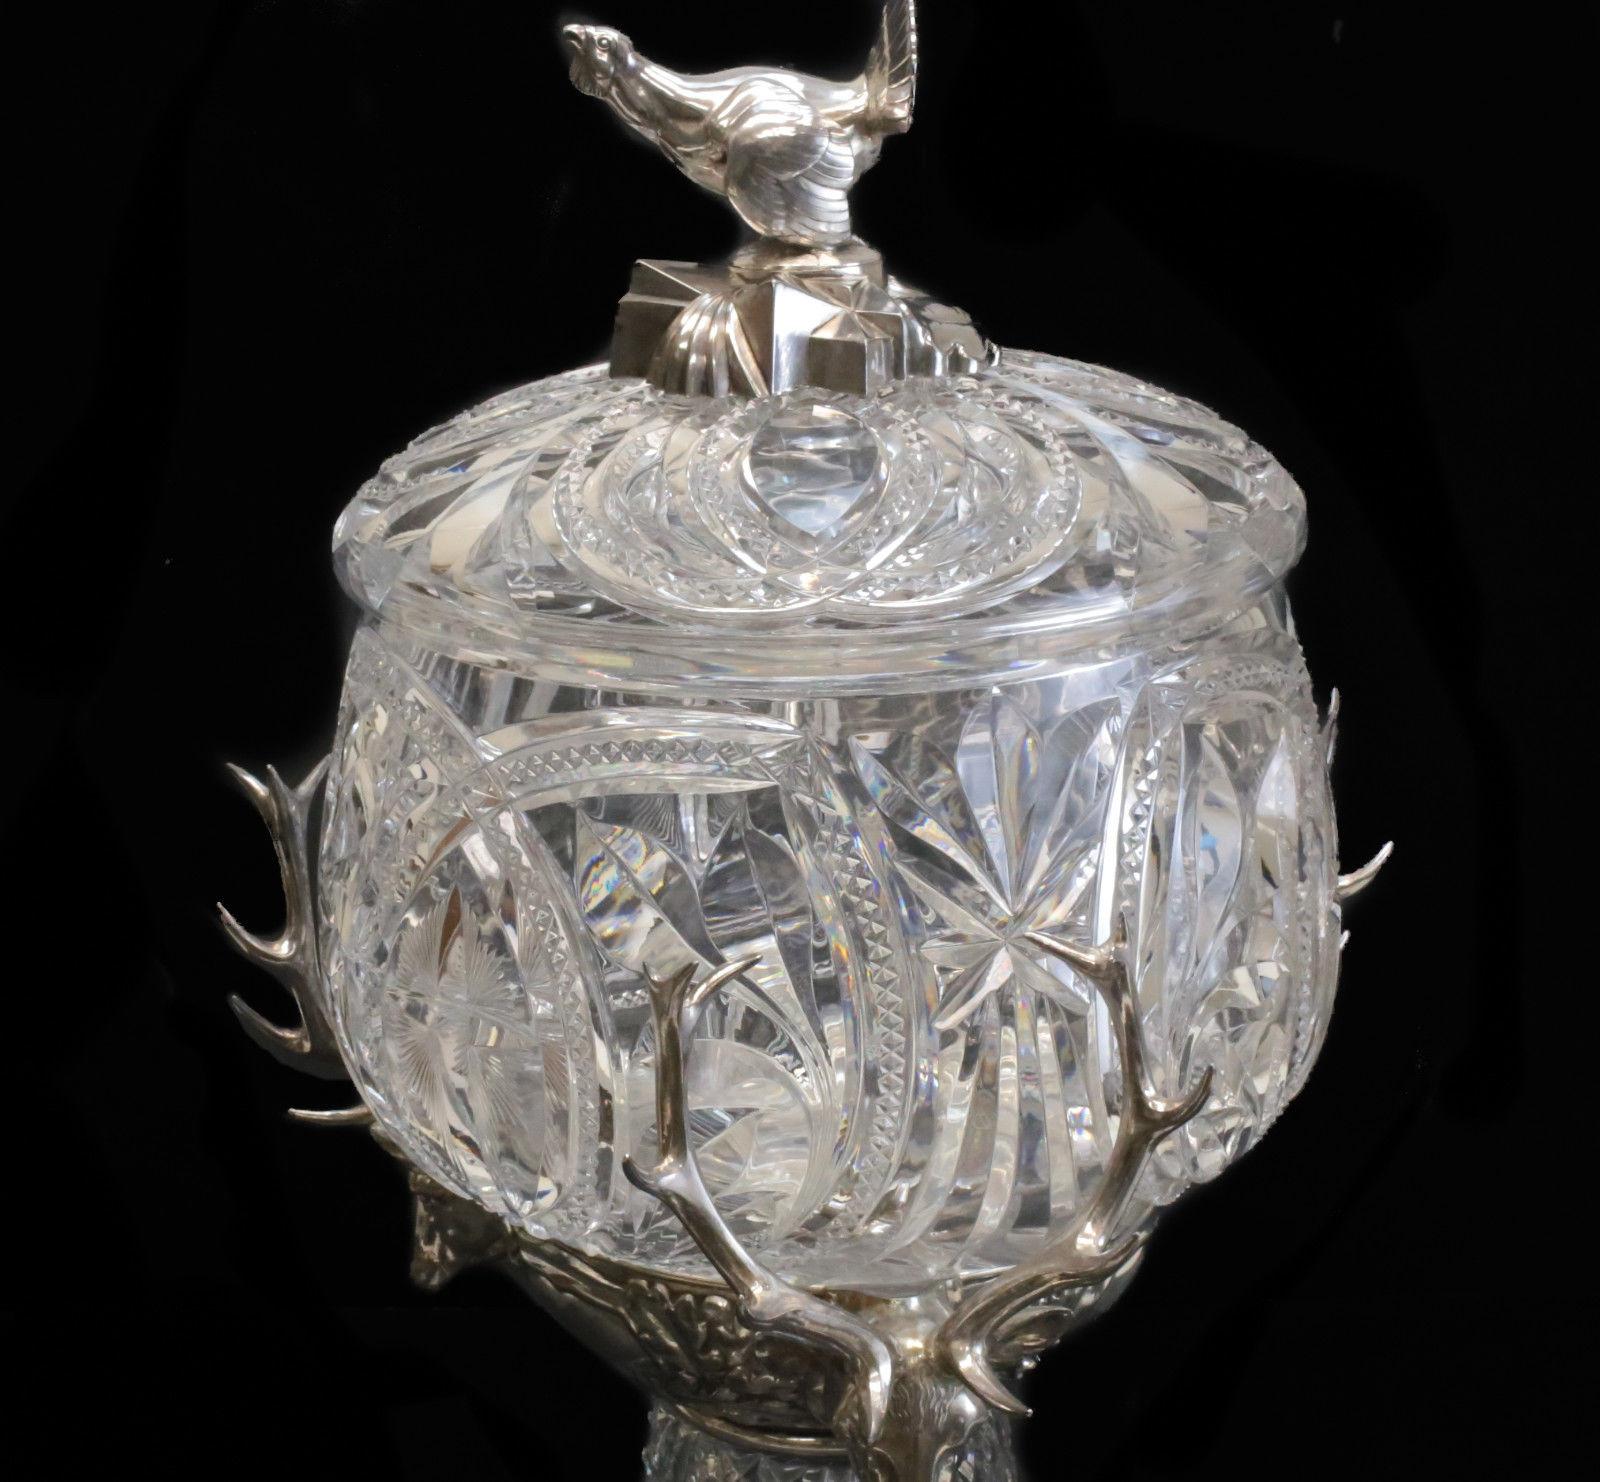 A magnificent WMF silver plate and brilliant cut glass lidded centerpiece bowl, circa 1910. Beautiful cut glass diamond and starburst designs throughout. 3 outstanding hand chased figural deer heads to the circular band and a figural chicken forming